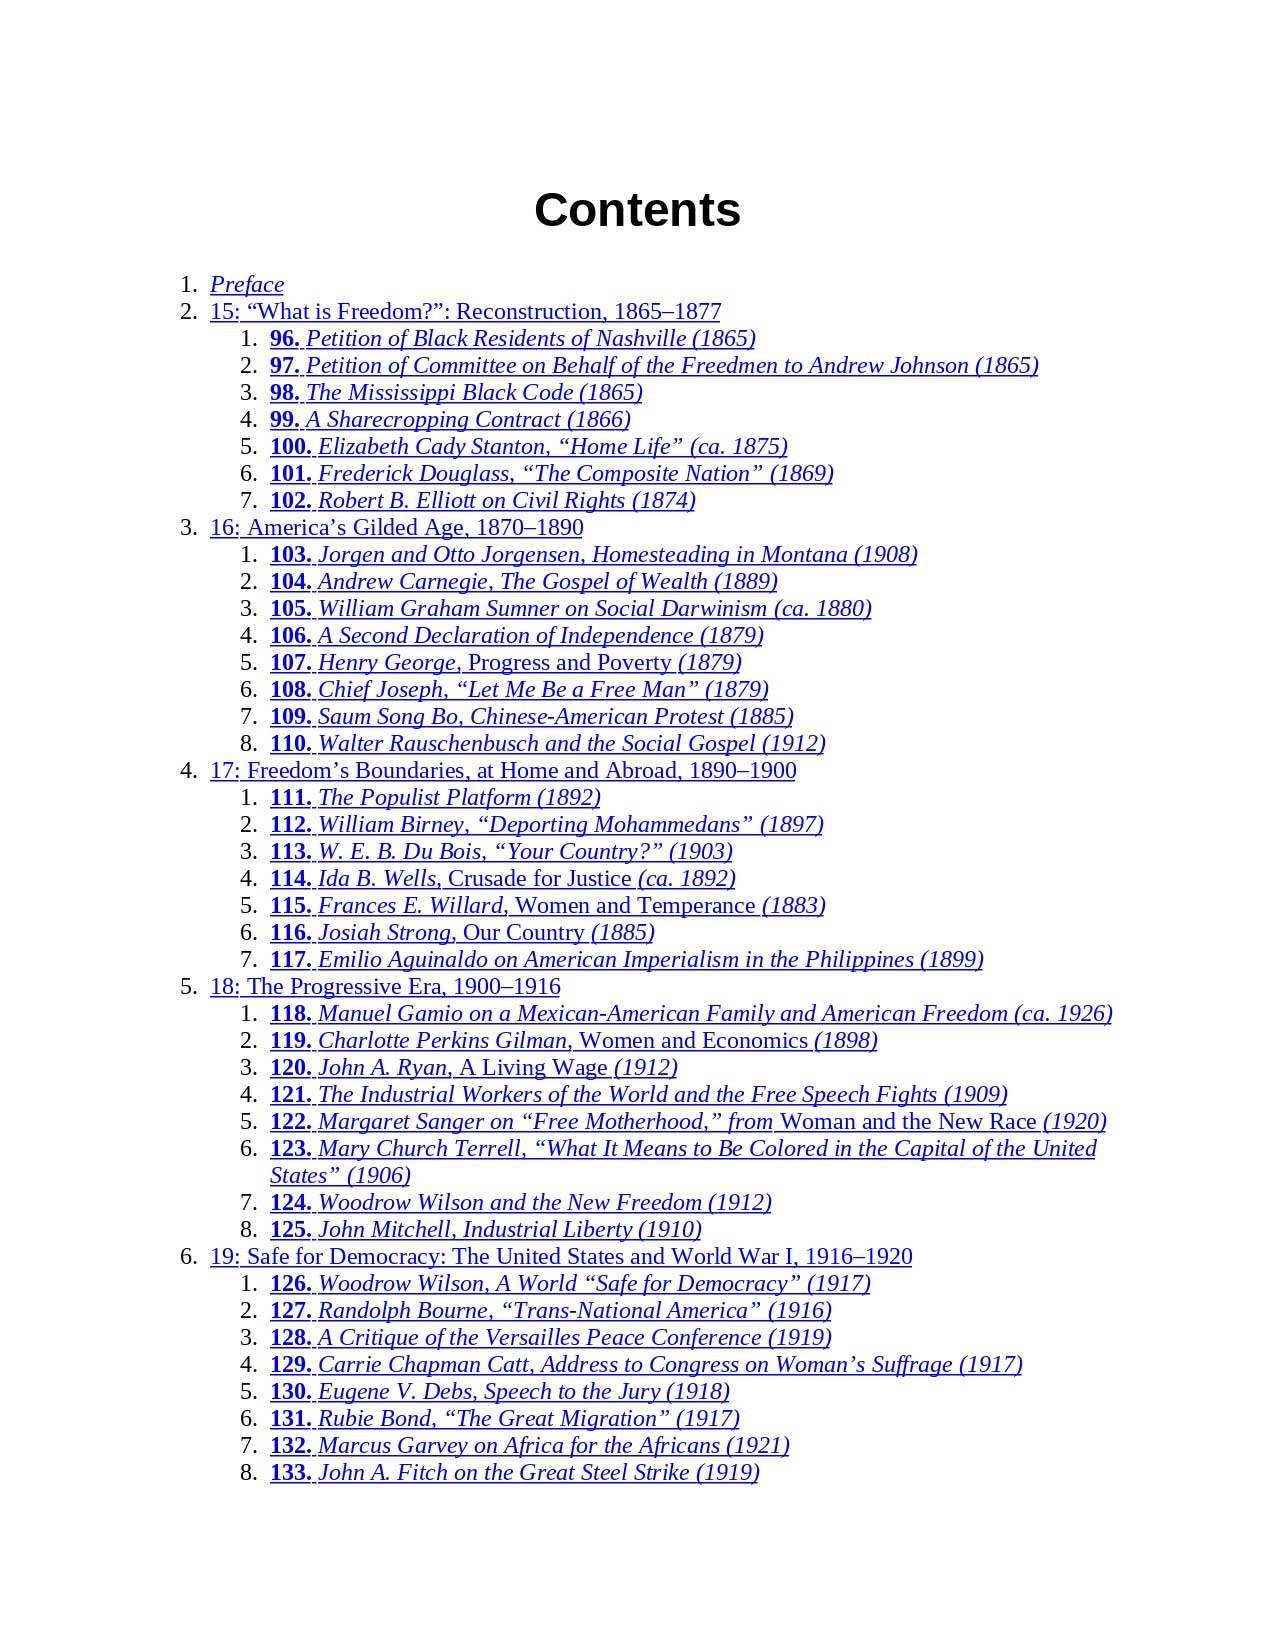 voices of freedom volume 2 6th edition table of contents